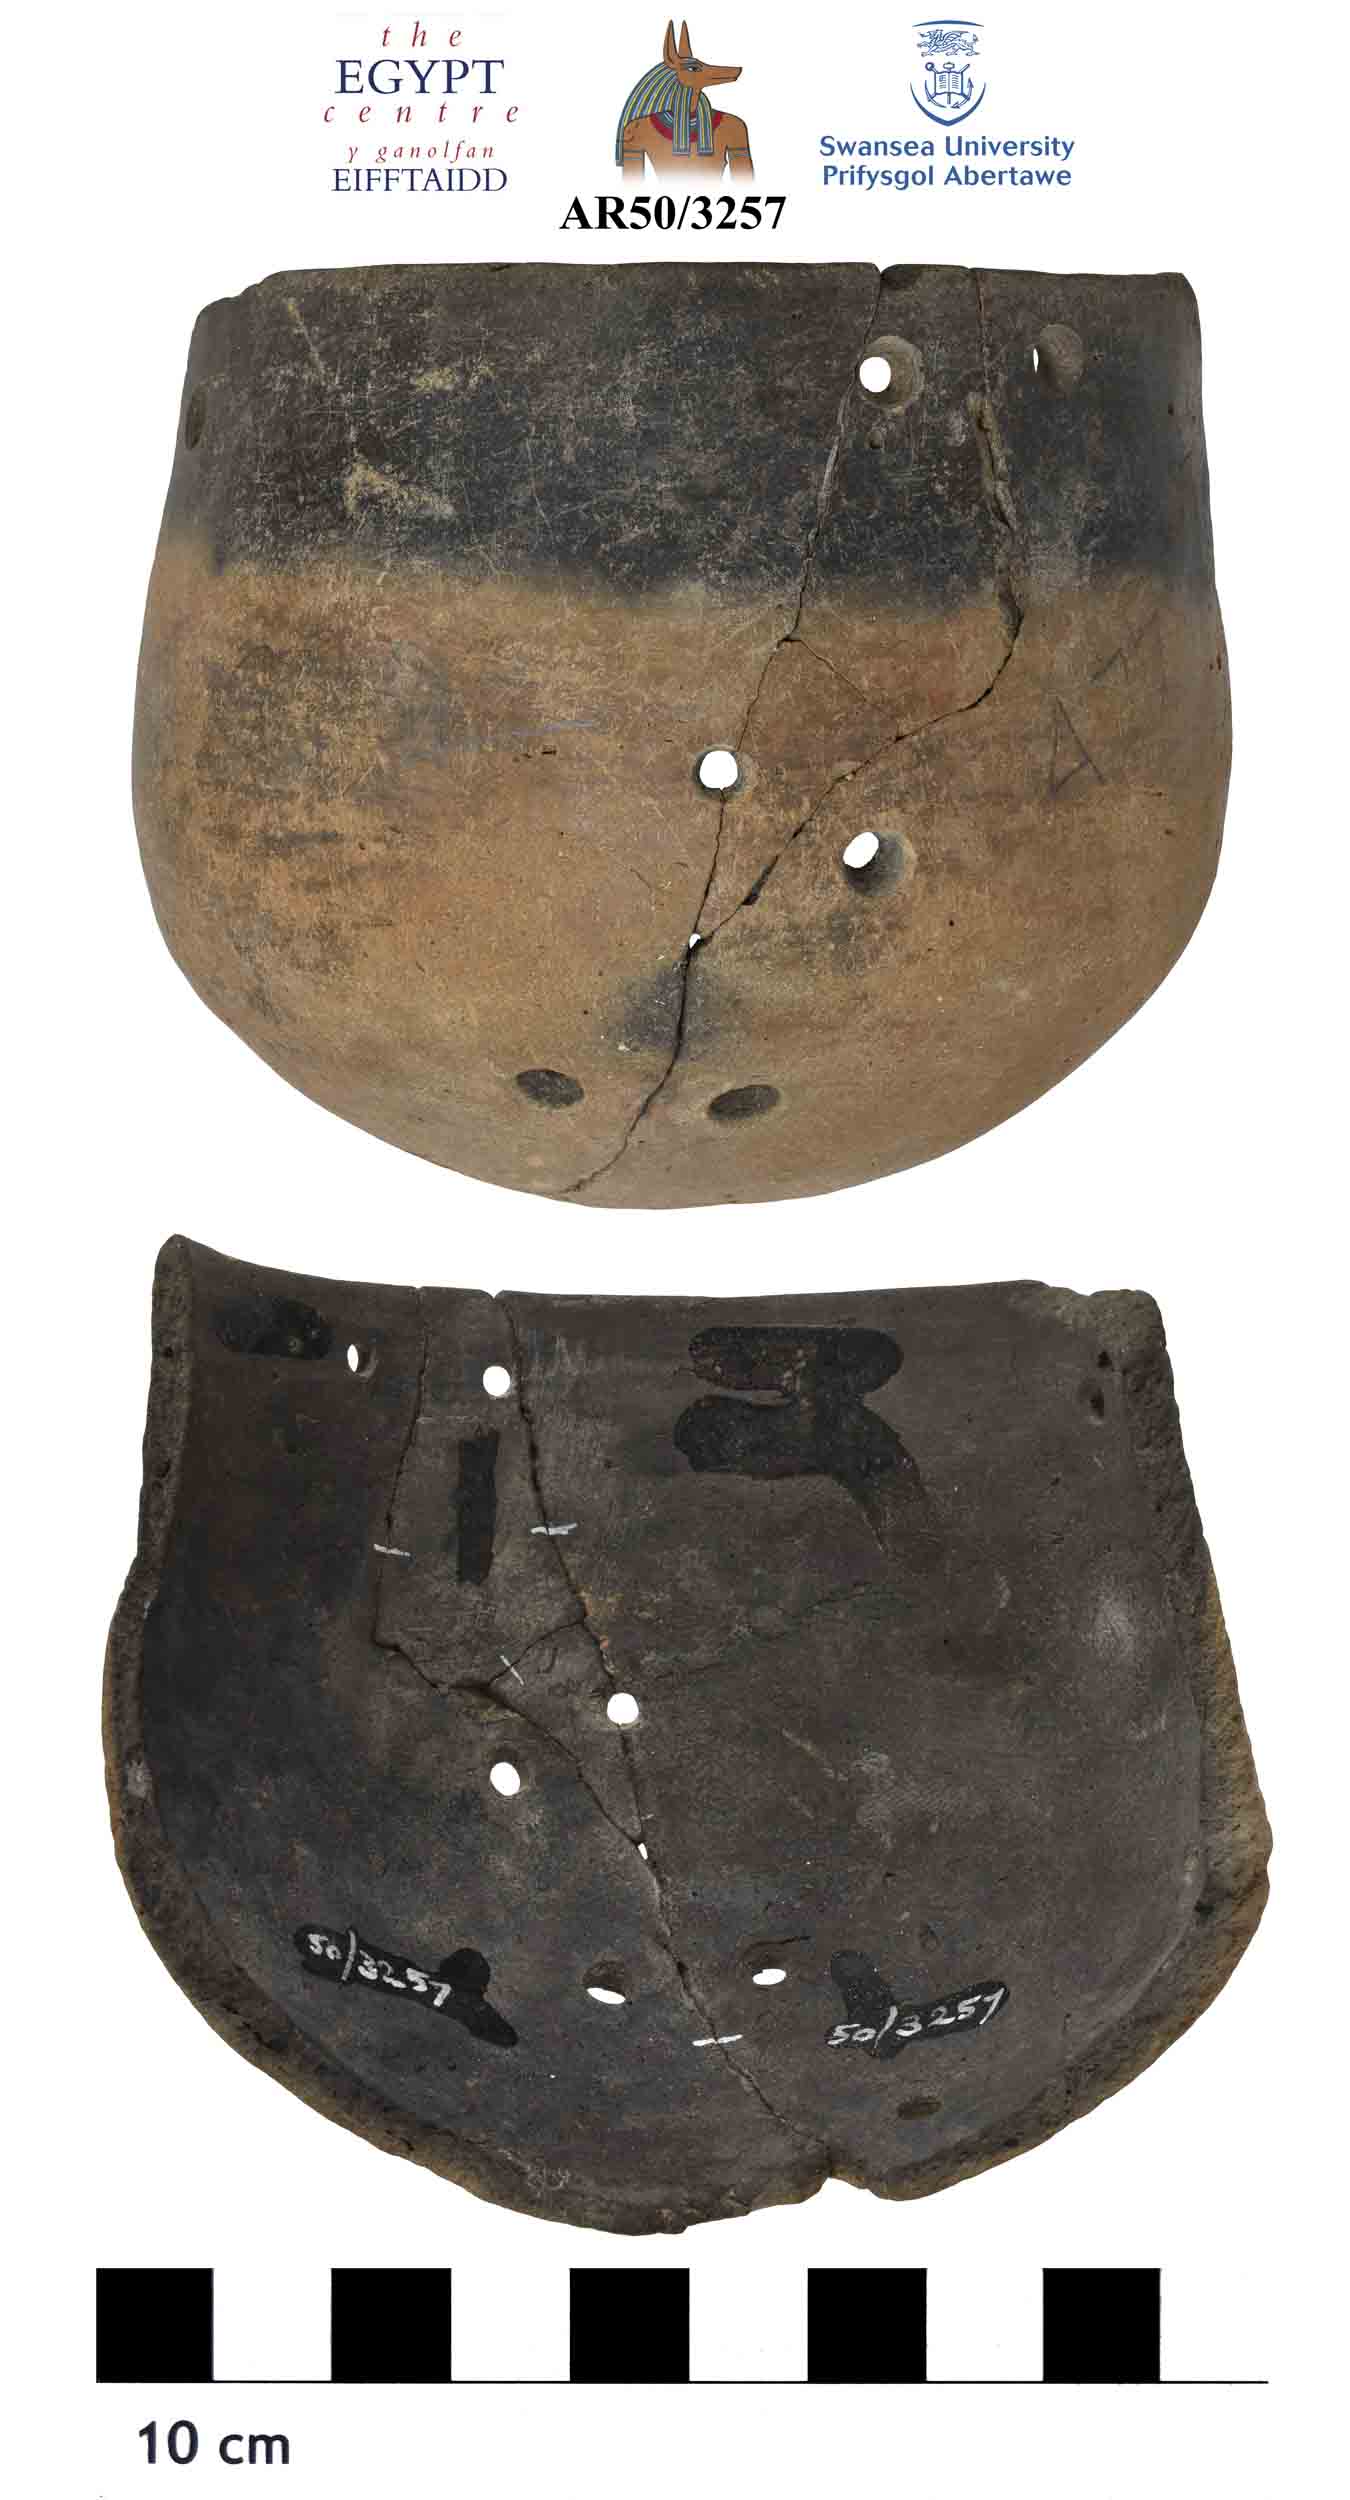 Image for: Sherds of a pottery bowl